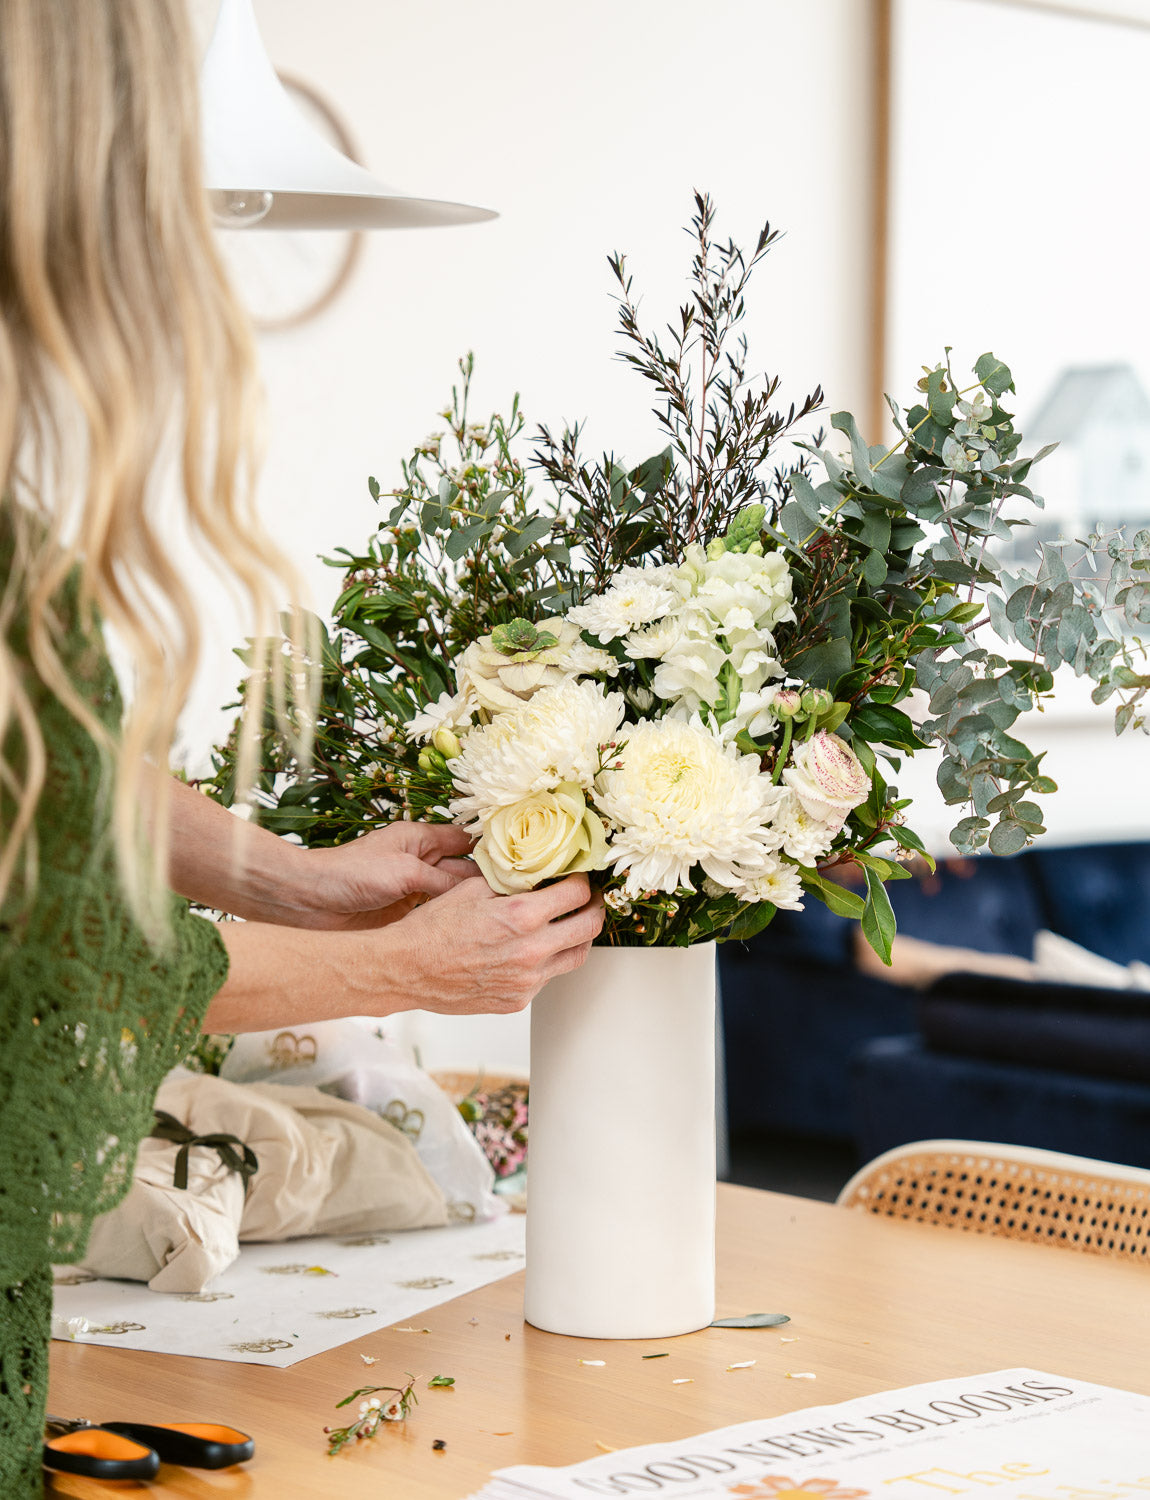 Flower care 101: 5 ways to keep your flowers fresher, longer!